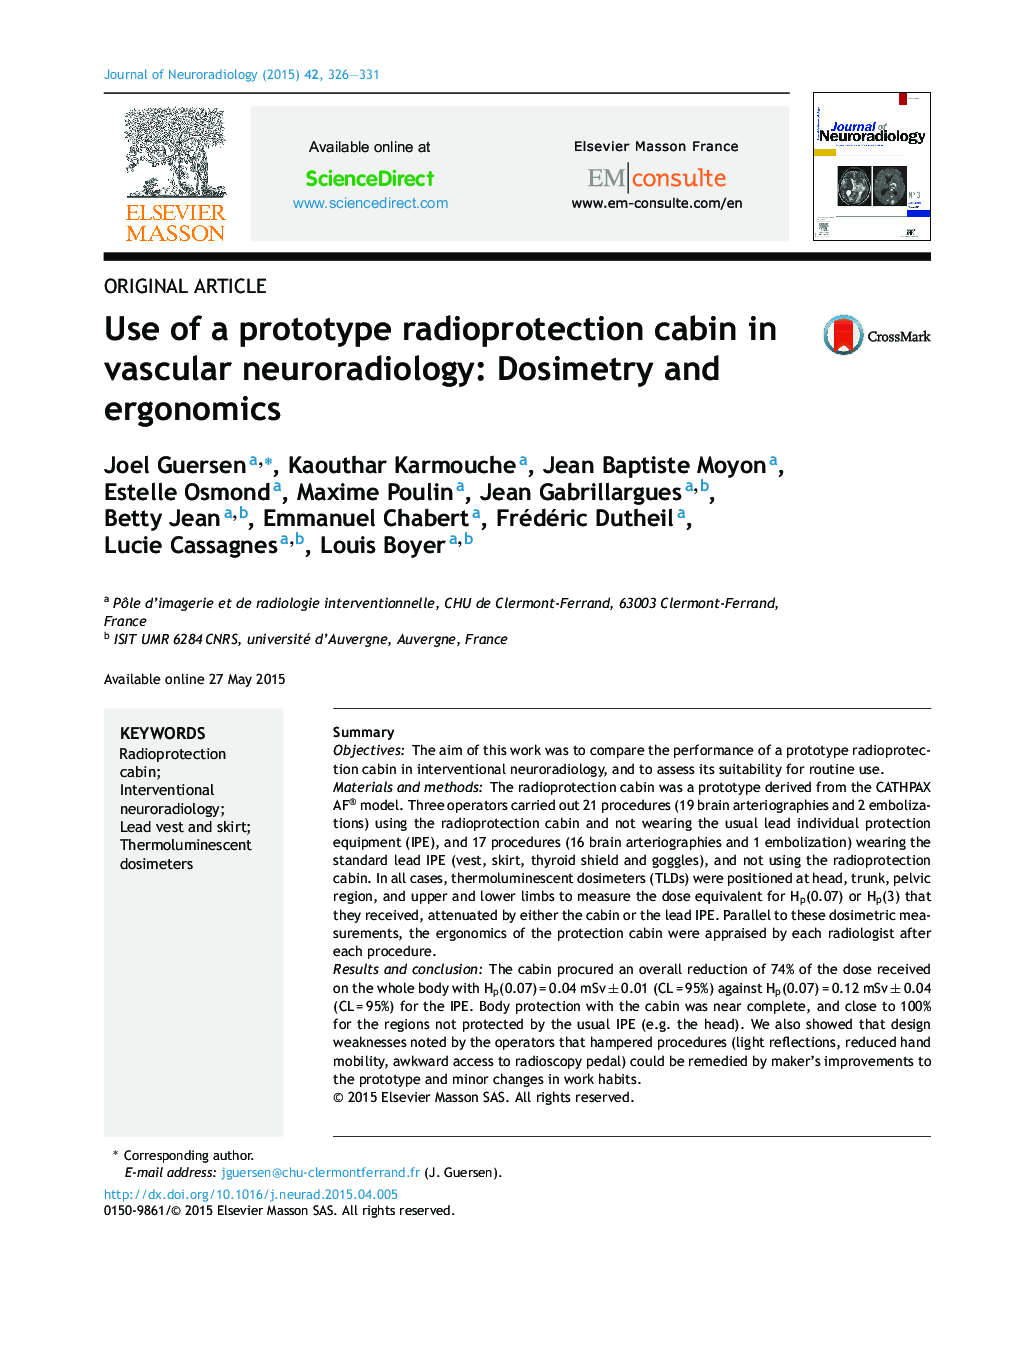 Use of a prototype radioprotection cabin in vascular neuroradiology: Dosimetry and ergonomics